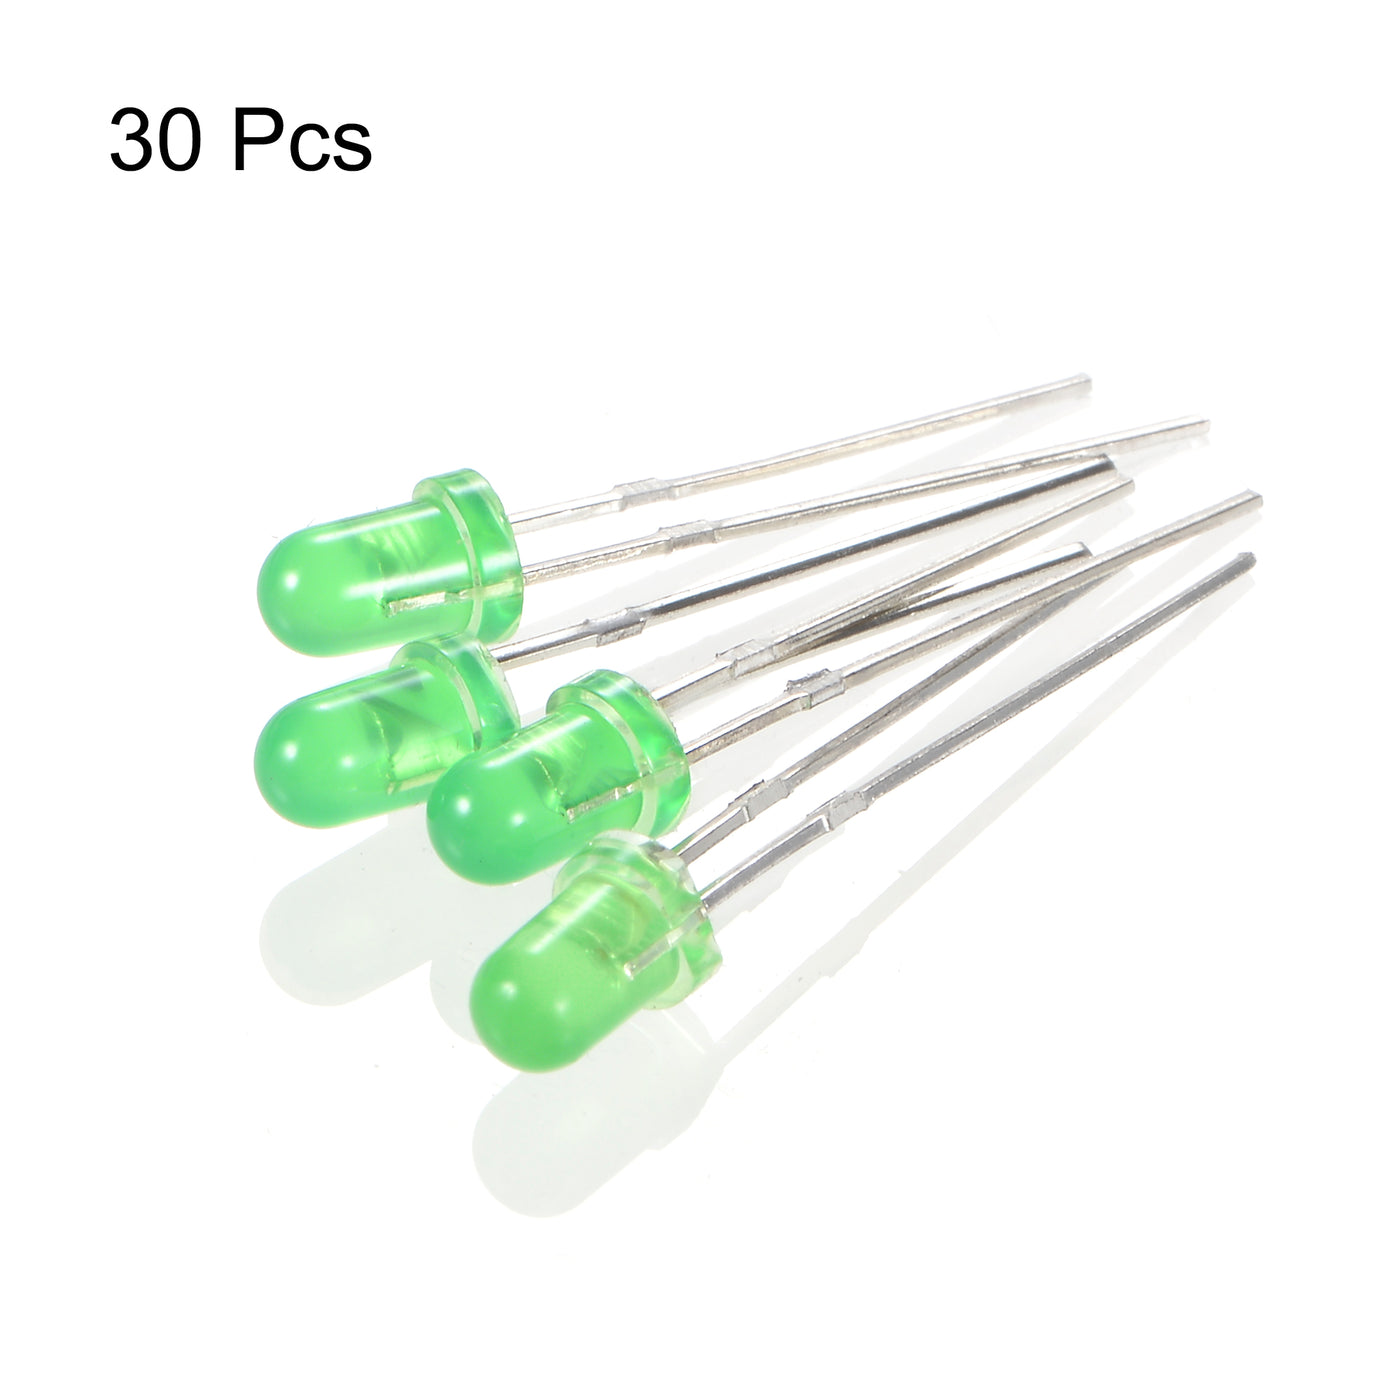 uxcell Uxcell 30pcs 3mm Infrared Emitter Diodes DC 3-3.2V 20mA LED IR Emitting Green Head